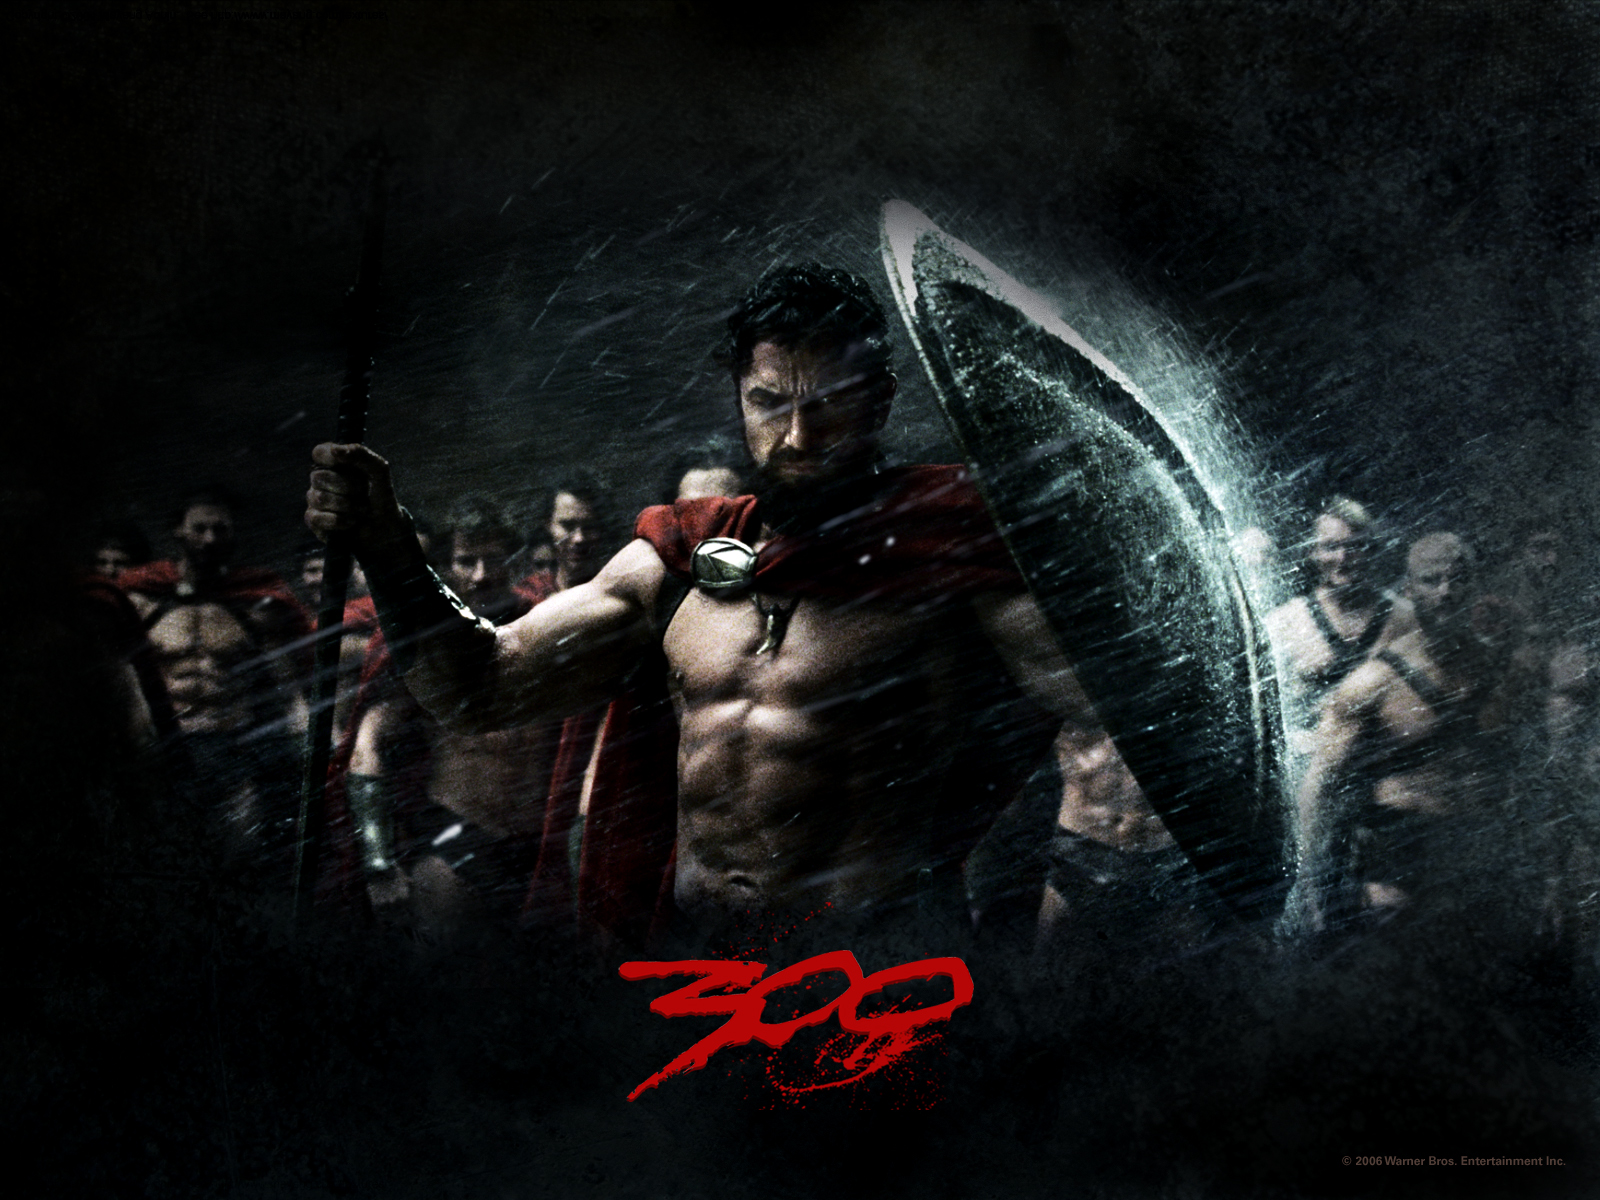 Download 300 Movie wallpapers for mobile phone free 300 Movie HD  pictures